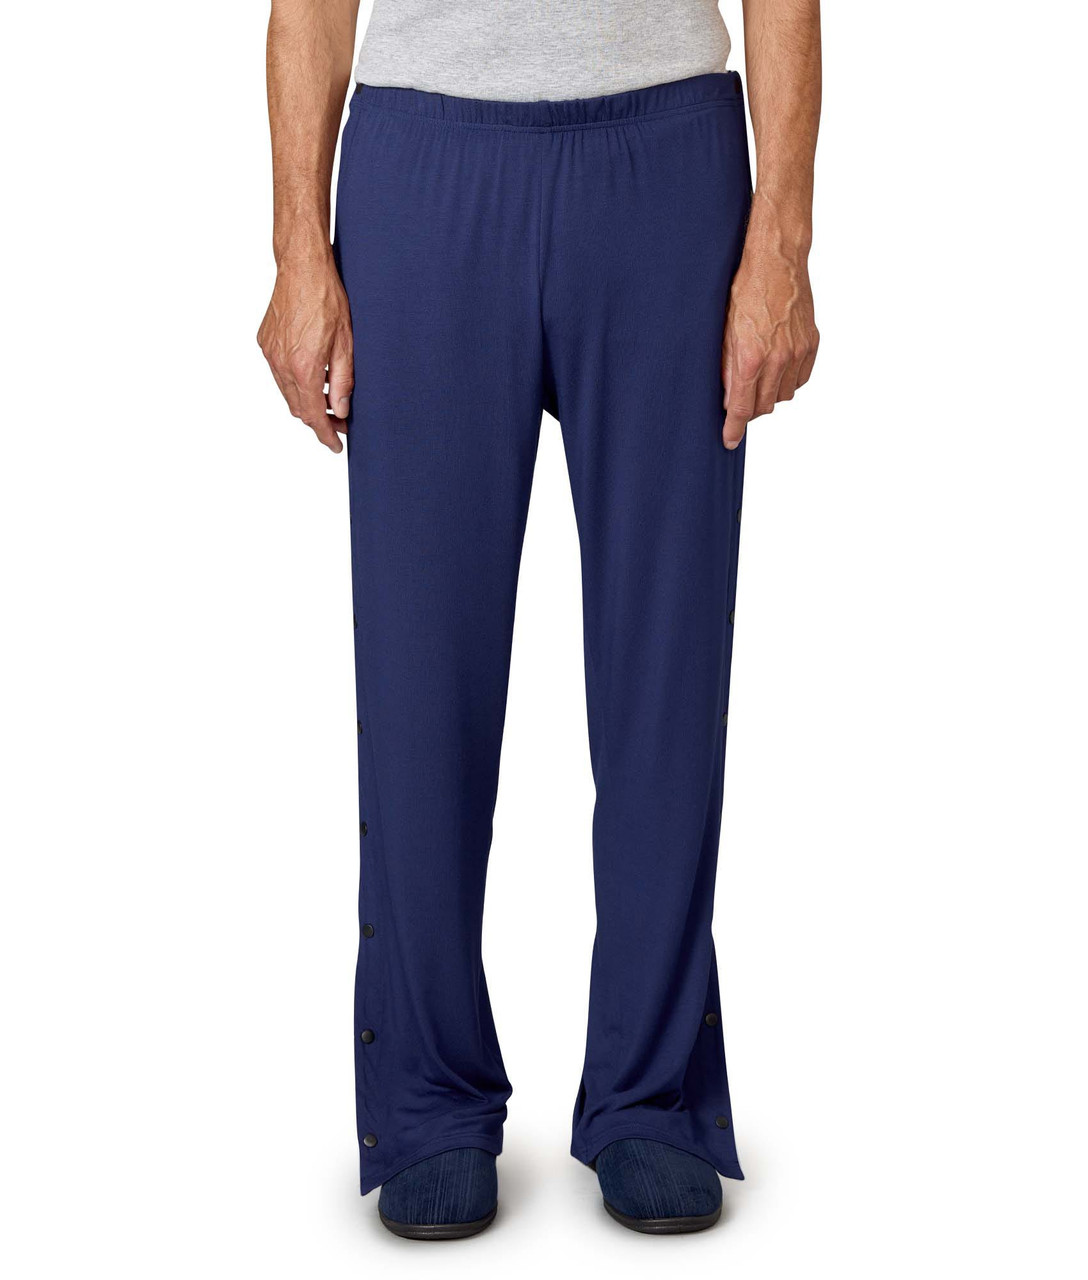 Silverts SV61010 Womens and Mens Post-Surgical Tearaway Pants With Snaps Navy, Size=M, SV61010-SV3-M